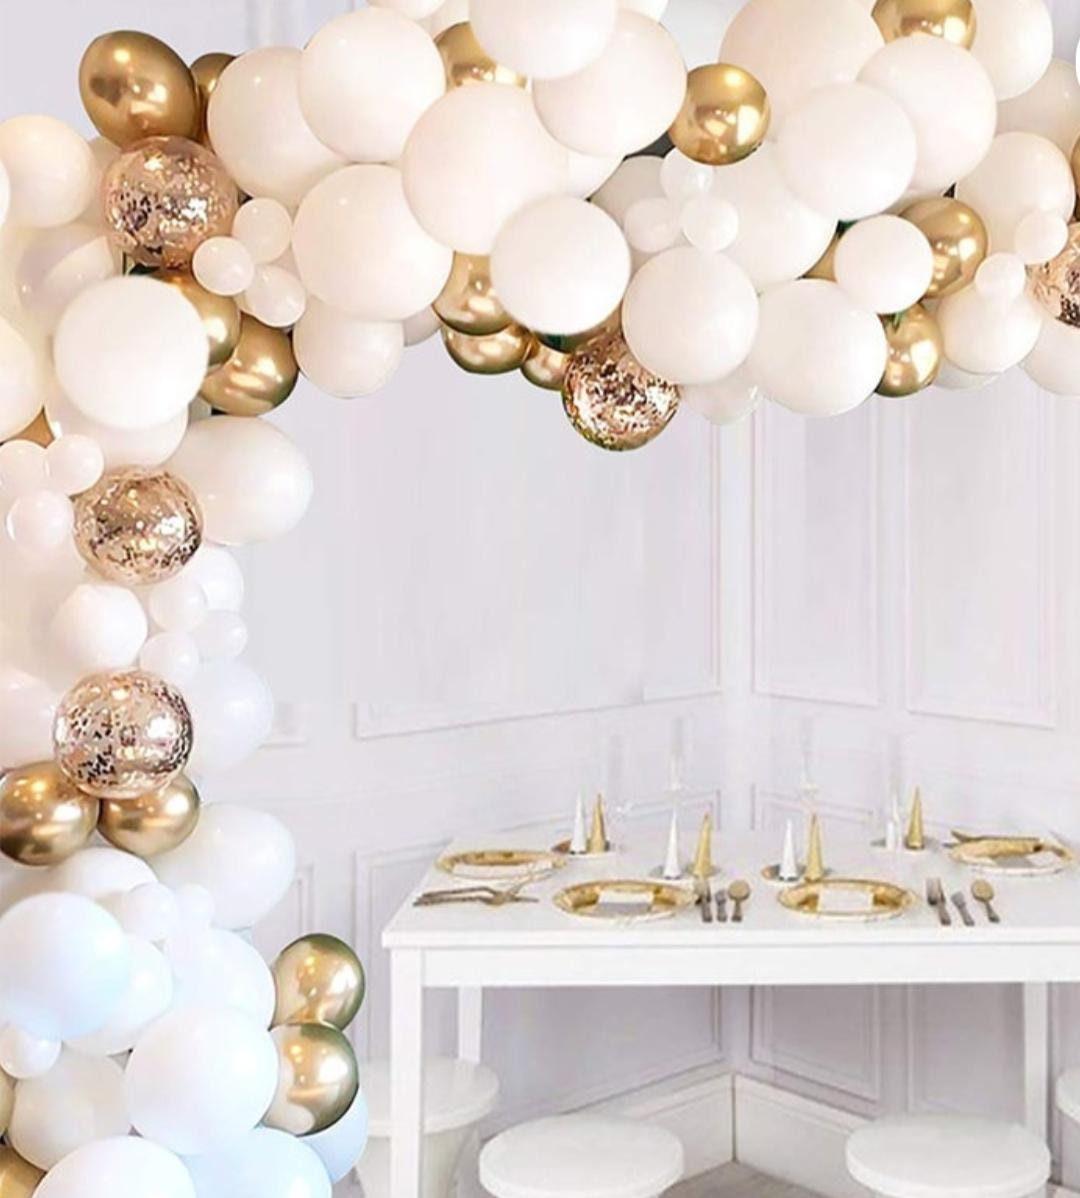 120PCS White Balloon Arch Garland Kit | Confetti And Gold Metallic Balloons | Baby Shower | Birthday Party | Background Decoration. - Lasercutwraps Shop